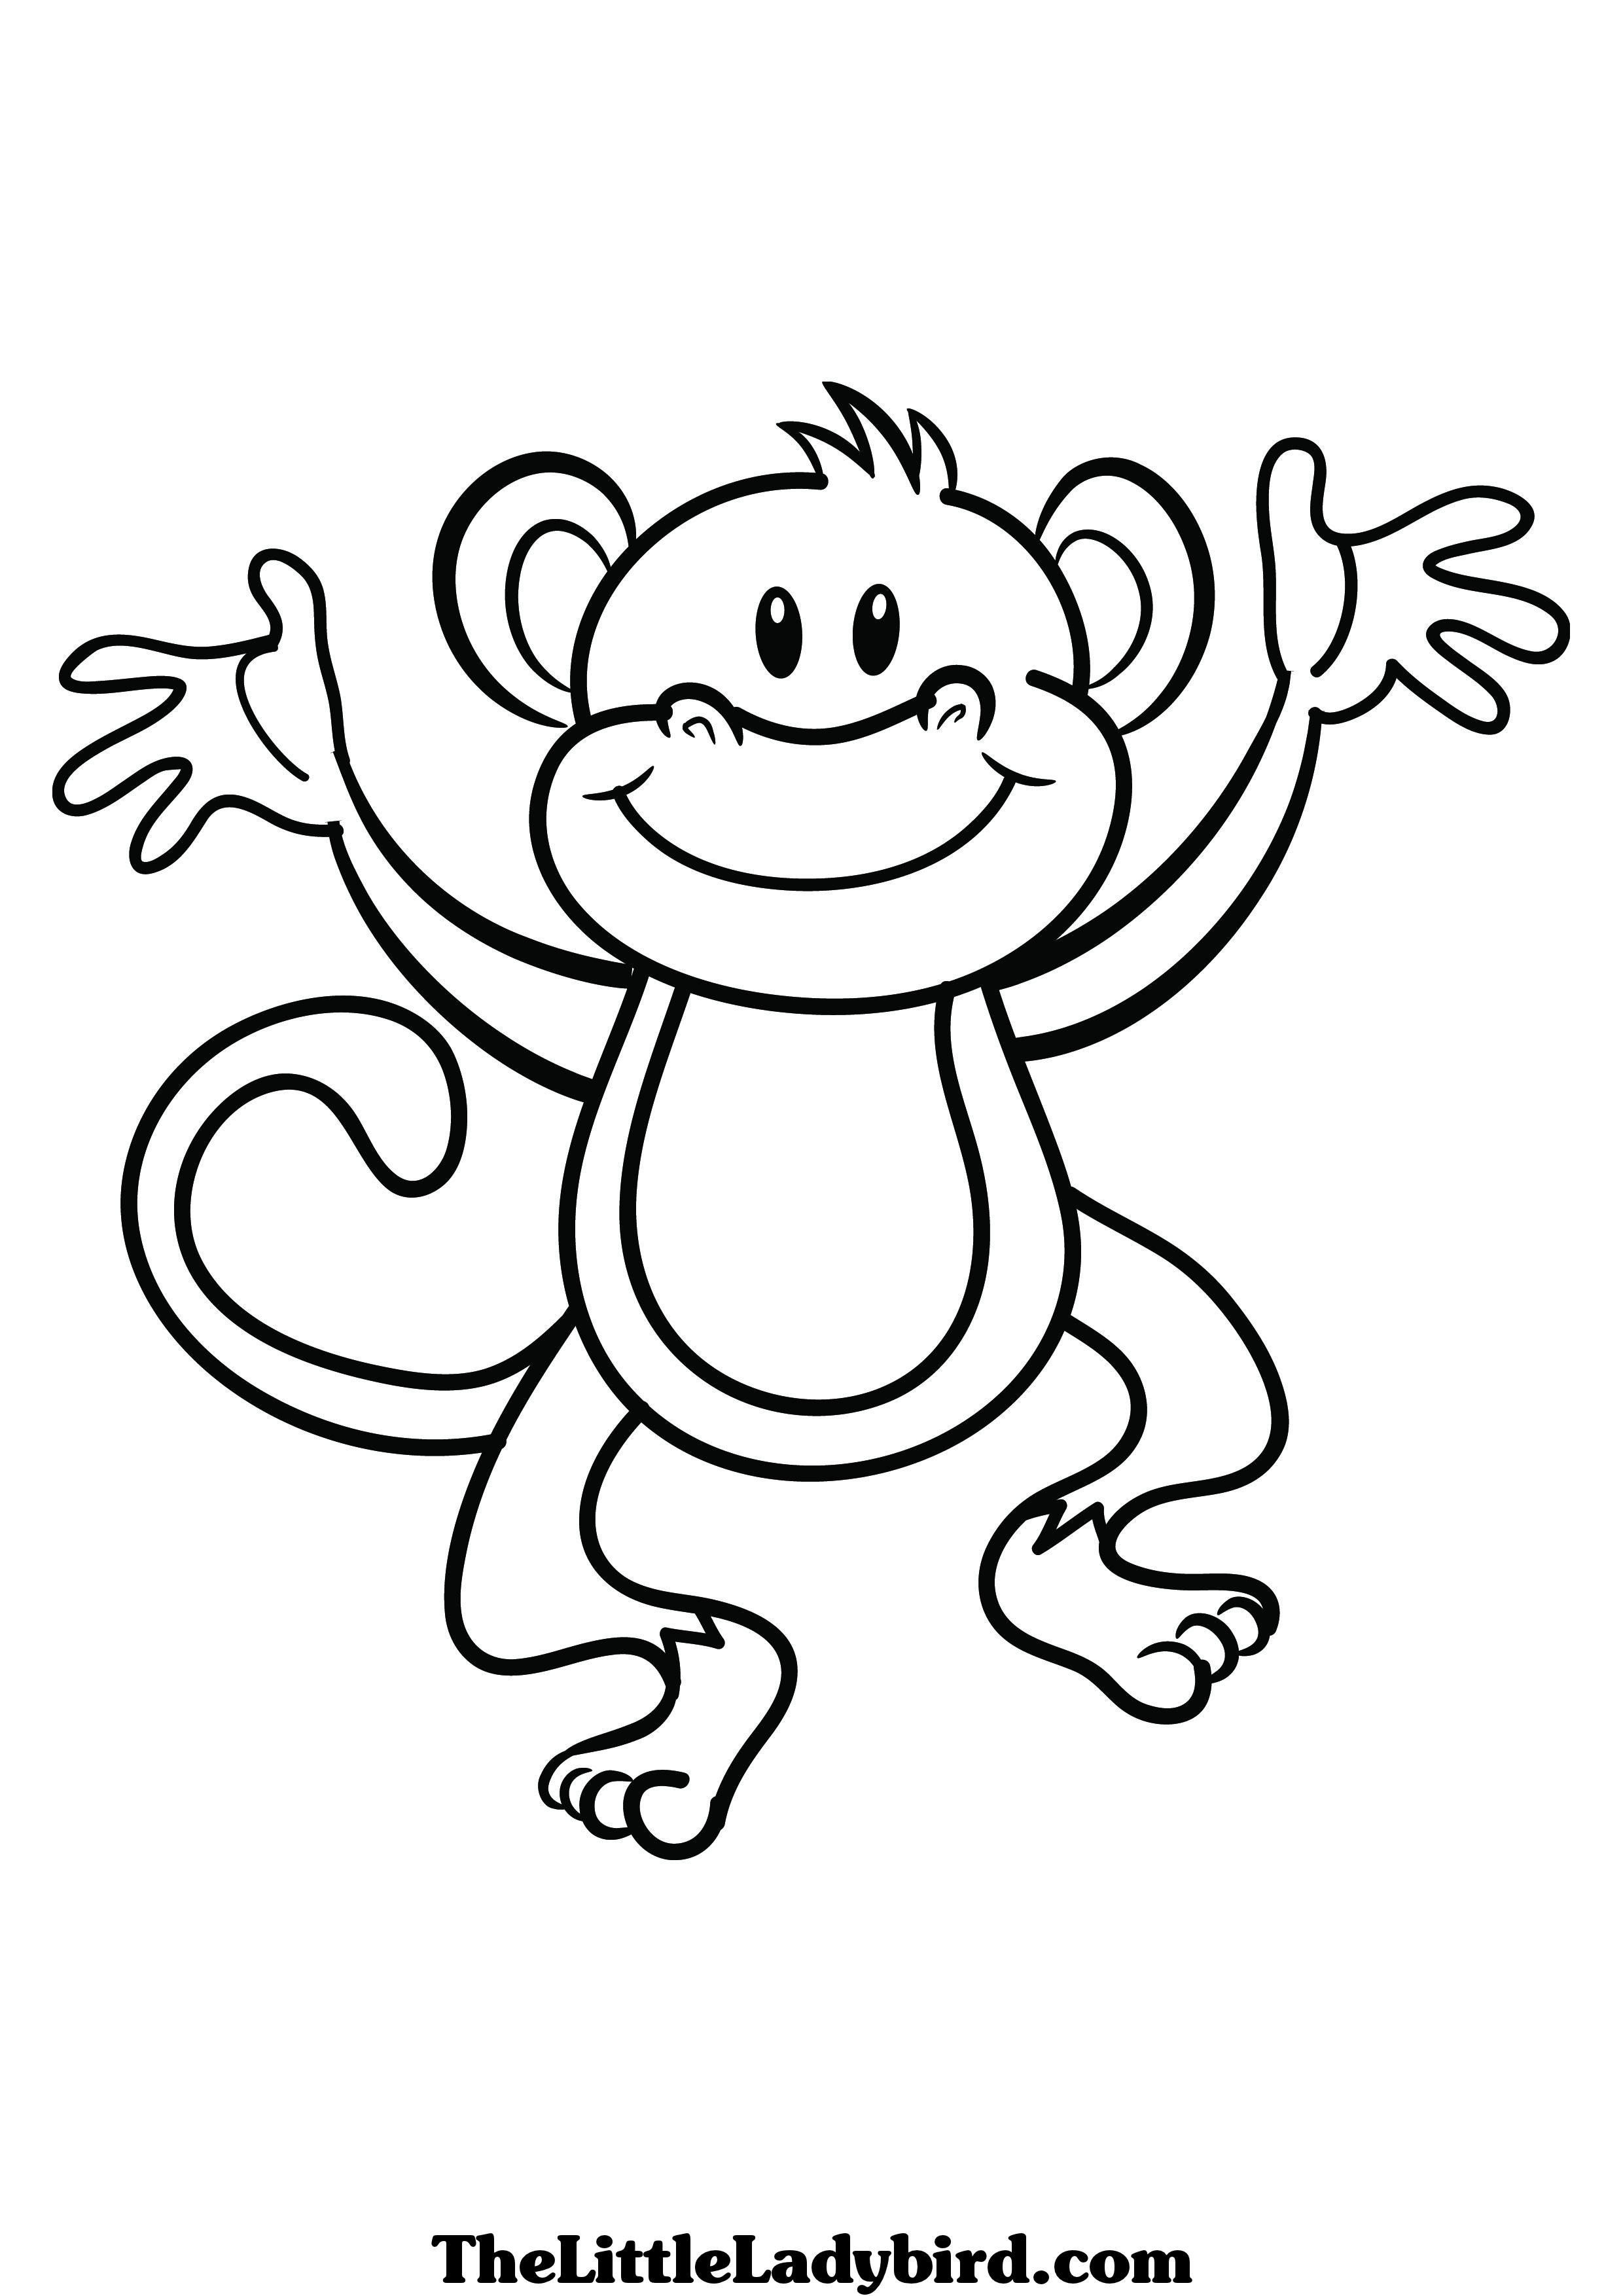  Monkey coloring pages | Monkey coloring page | #19